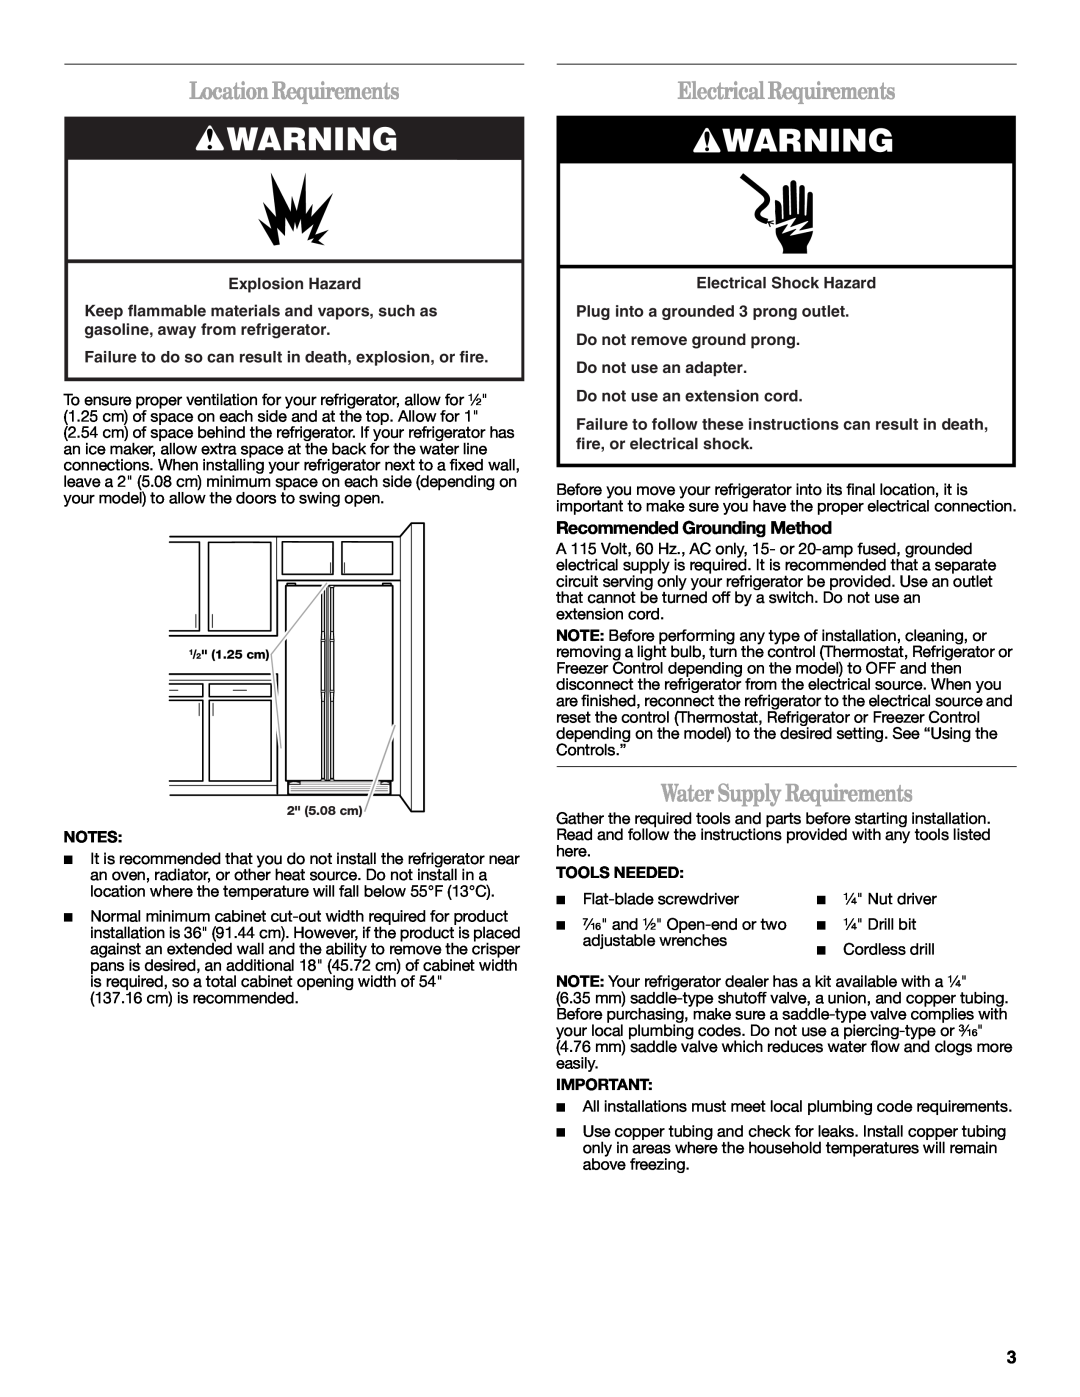 Amana W10316638A LocationRequirements, Electrical Requirements, Water Supply Requirements, Explosion Hazard 